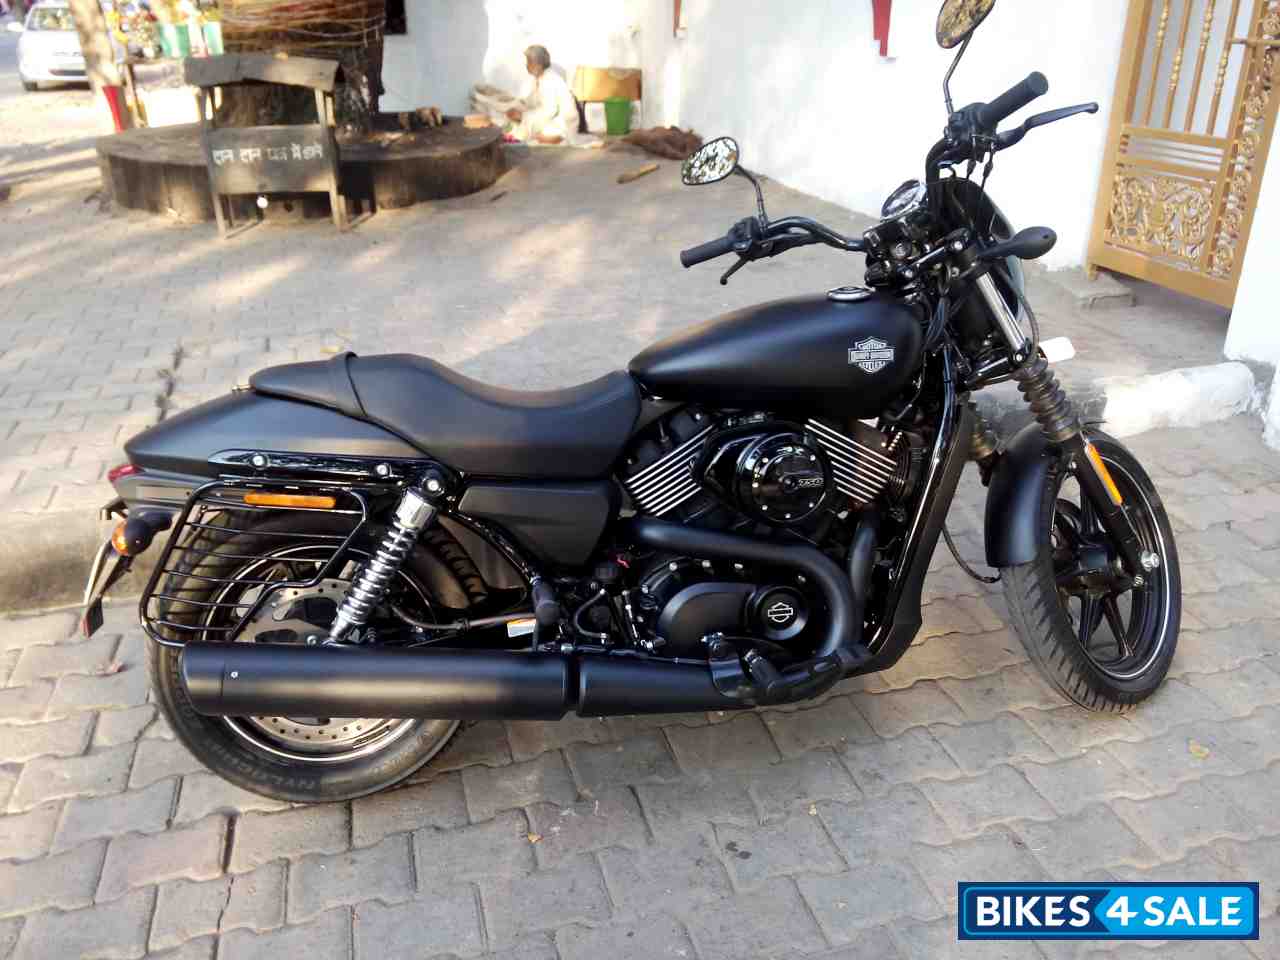 Used 2016 Model Harley Davidson Street 750 For Sale In Chandigarh Id 127364 Black Colour Bikes4sale